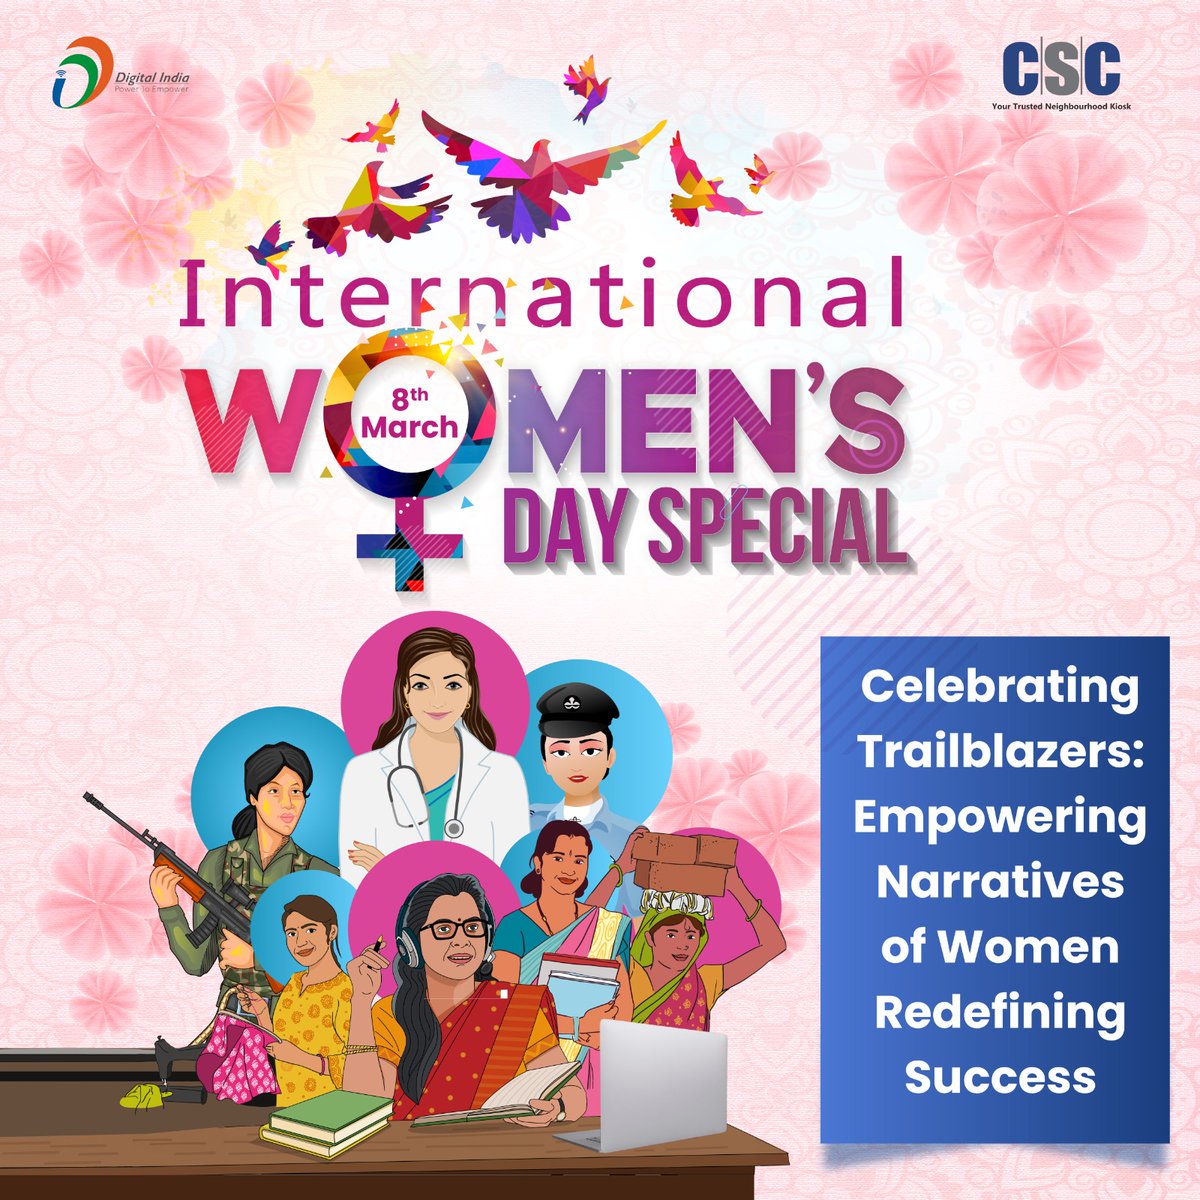 Happy International Women's Day to all! On this special occasion, we are delighted to present the International Women's Day Special Edition of #CSCMagazine It is a must-read on #InternationalWomensDay! csc.gov.in/assets/e-magaz… To subscribe, visit: bit.ly/45CP3ud